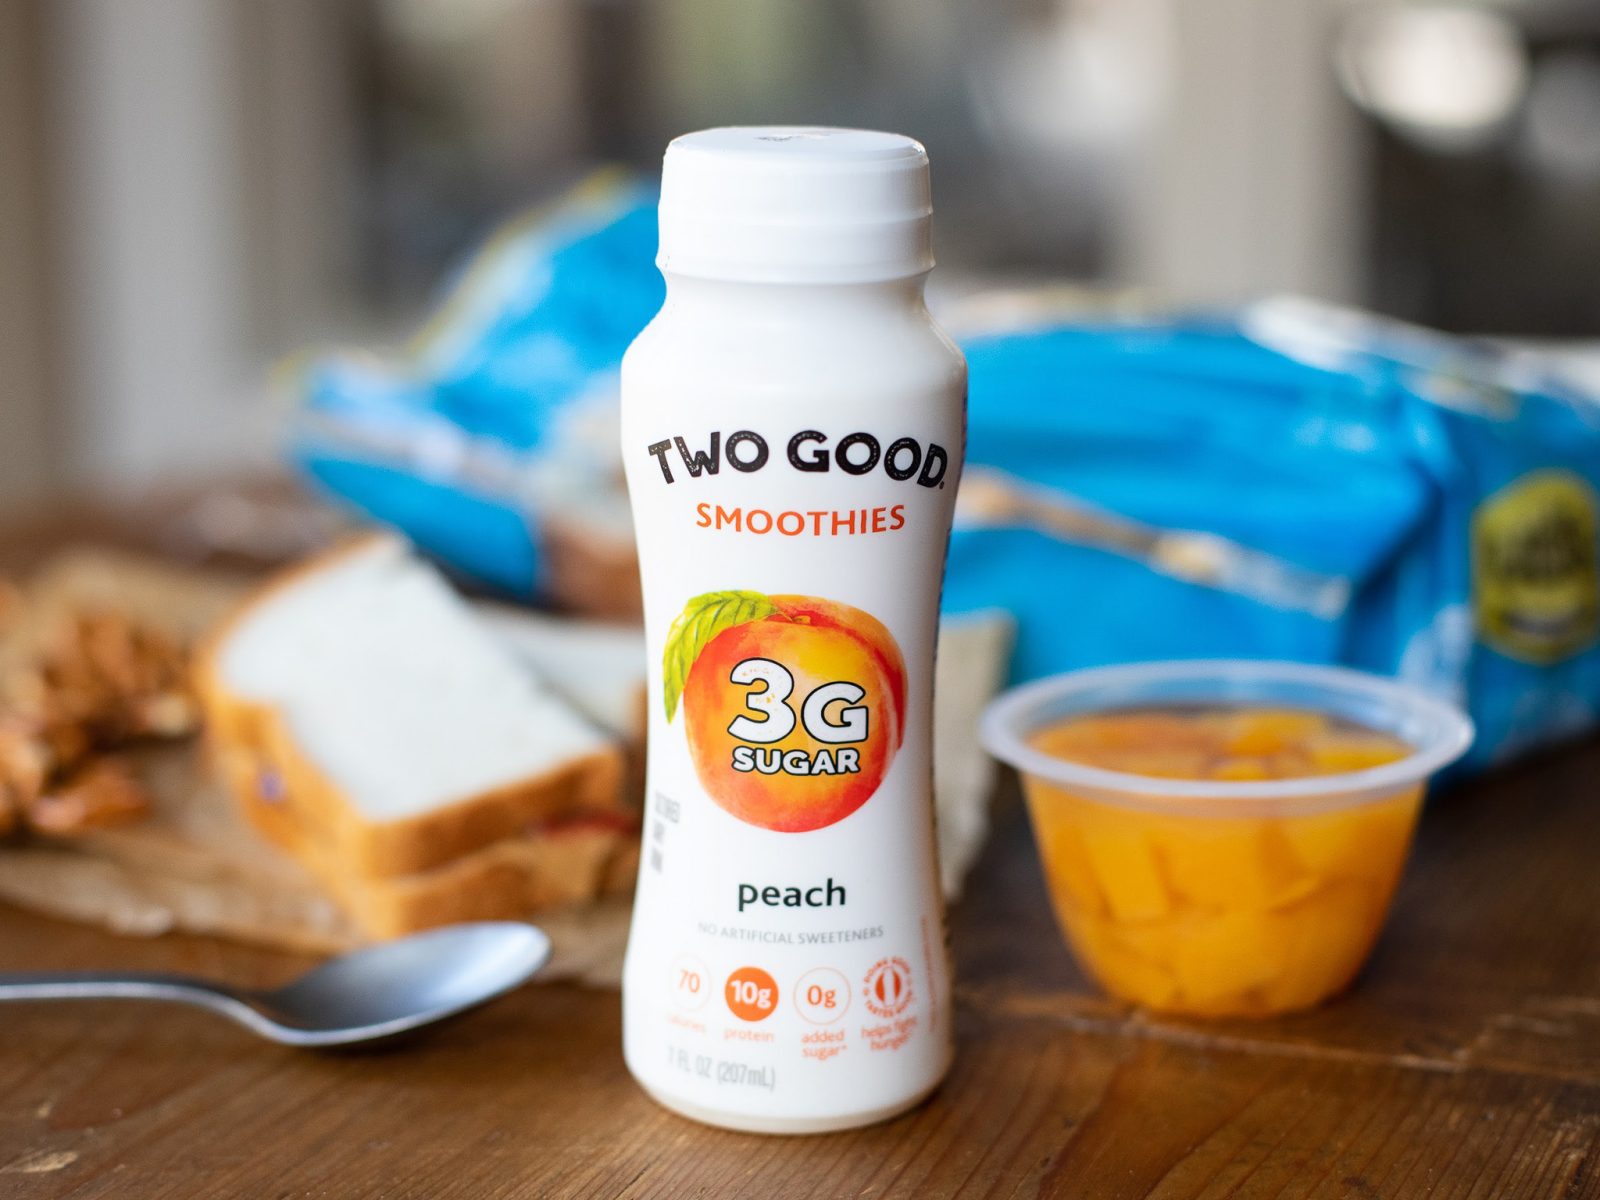 Two Good Smoothies Are As Low As 89¢ At Kroger